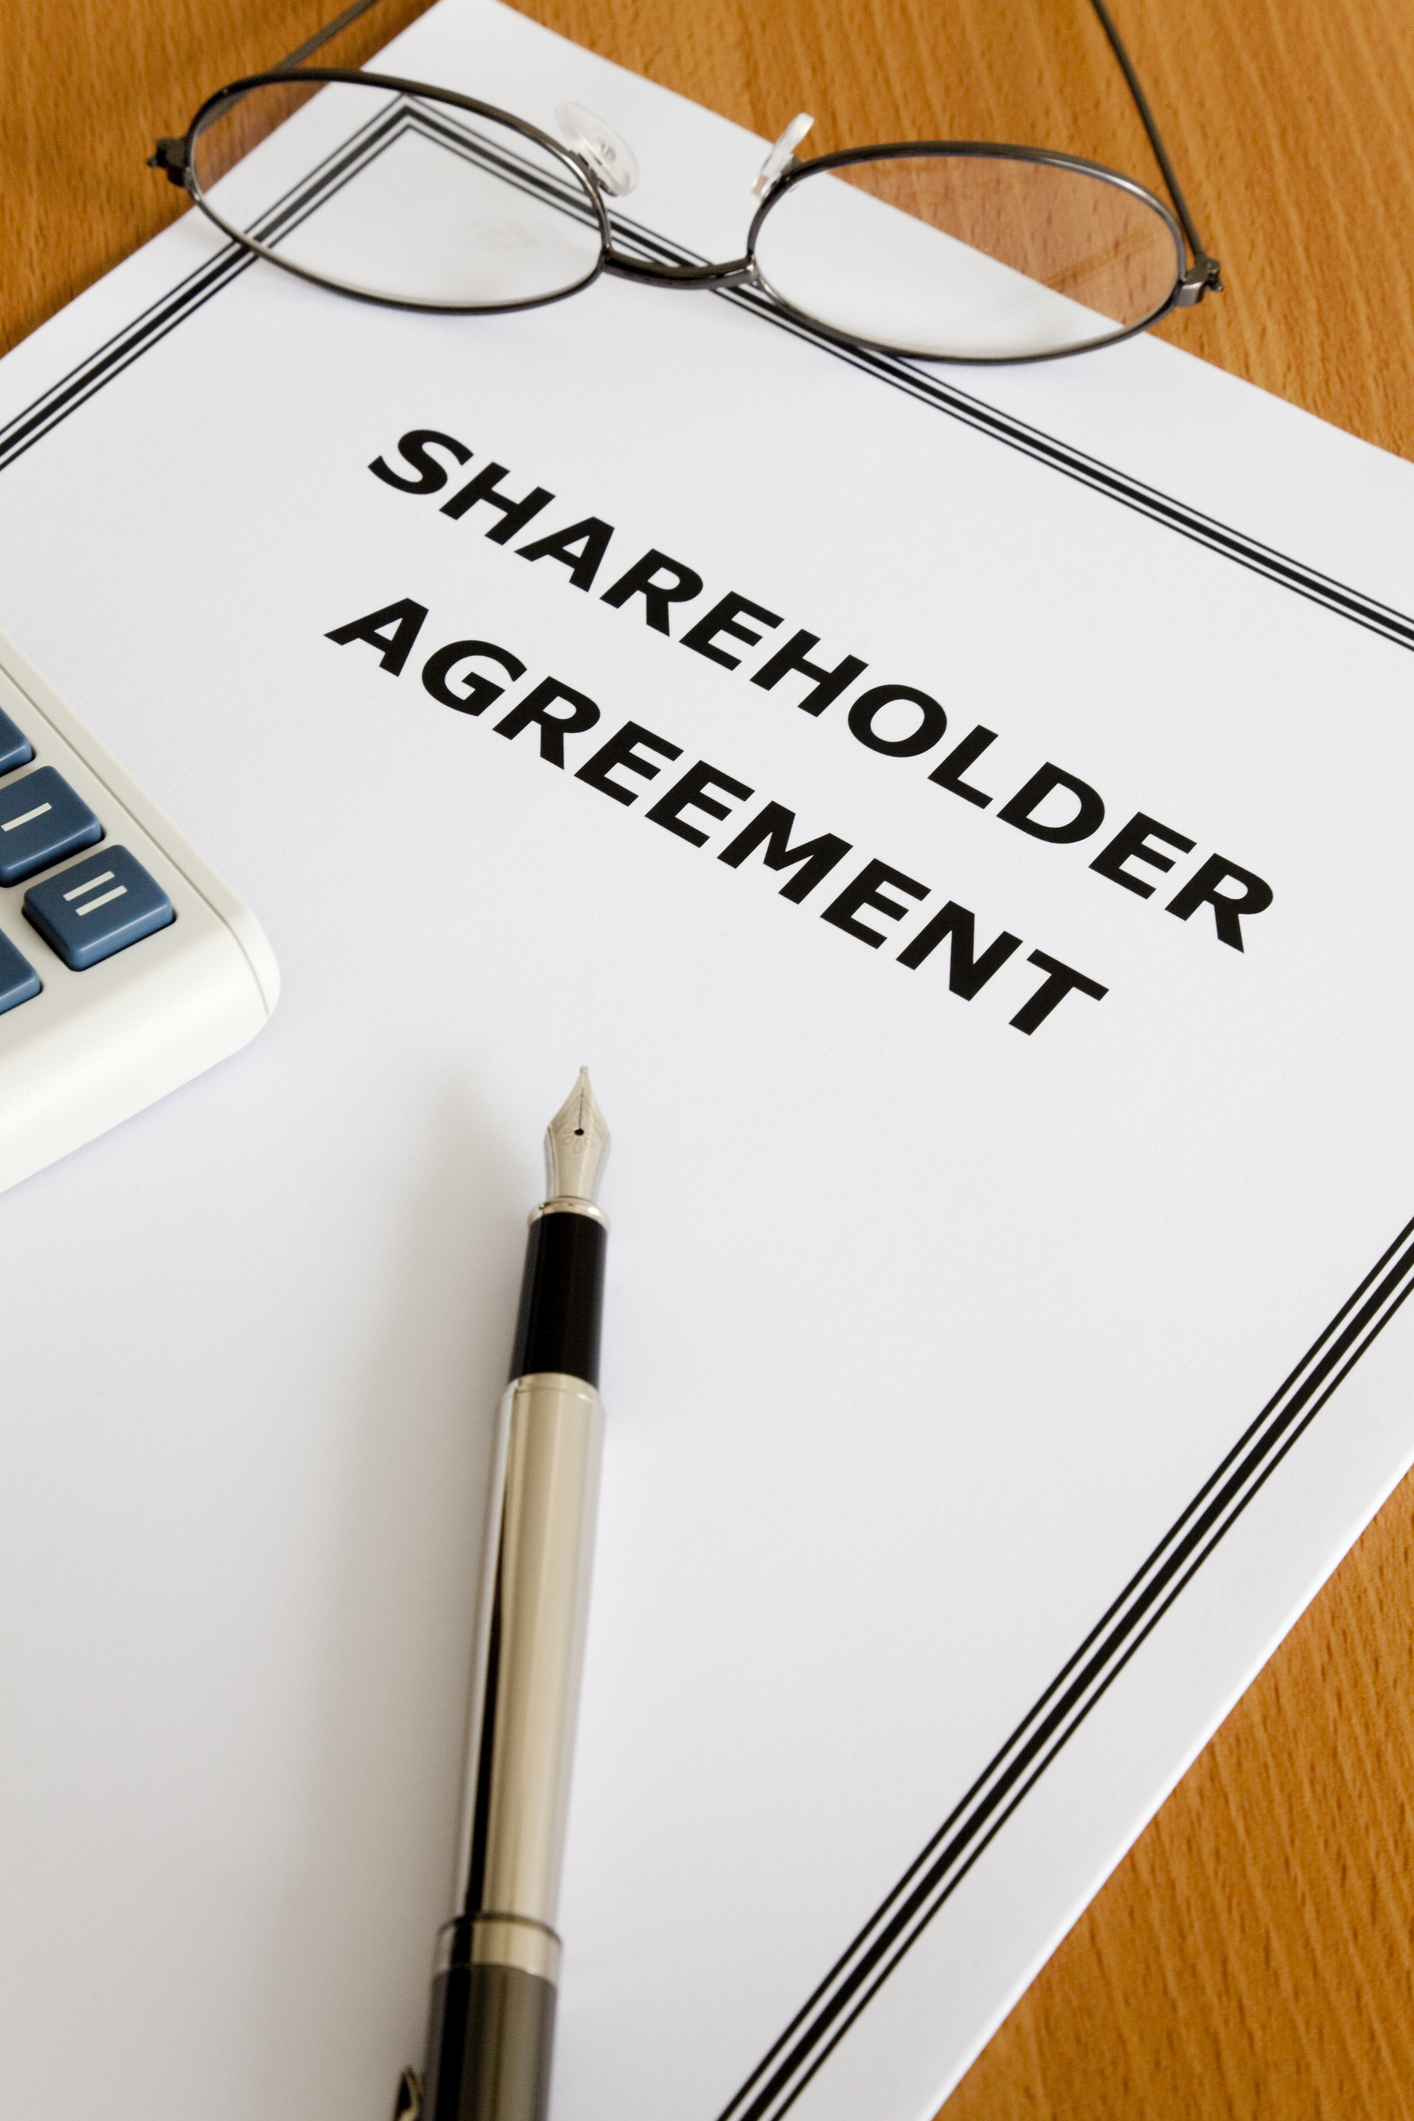 New Case Addresses Termination of Employment as Shareholder Oppression